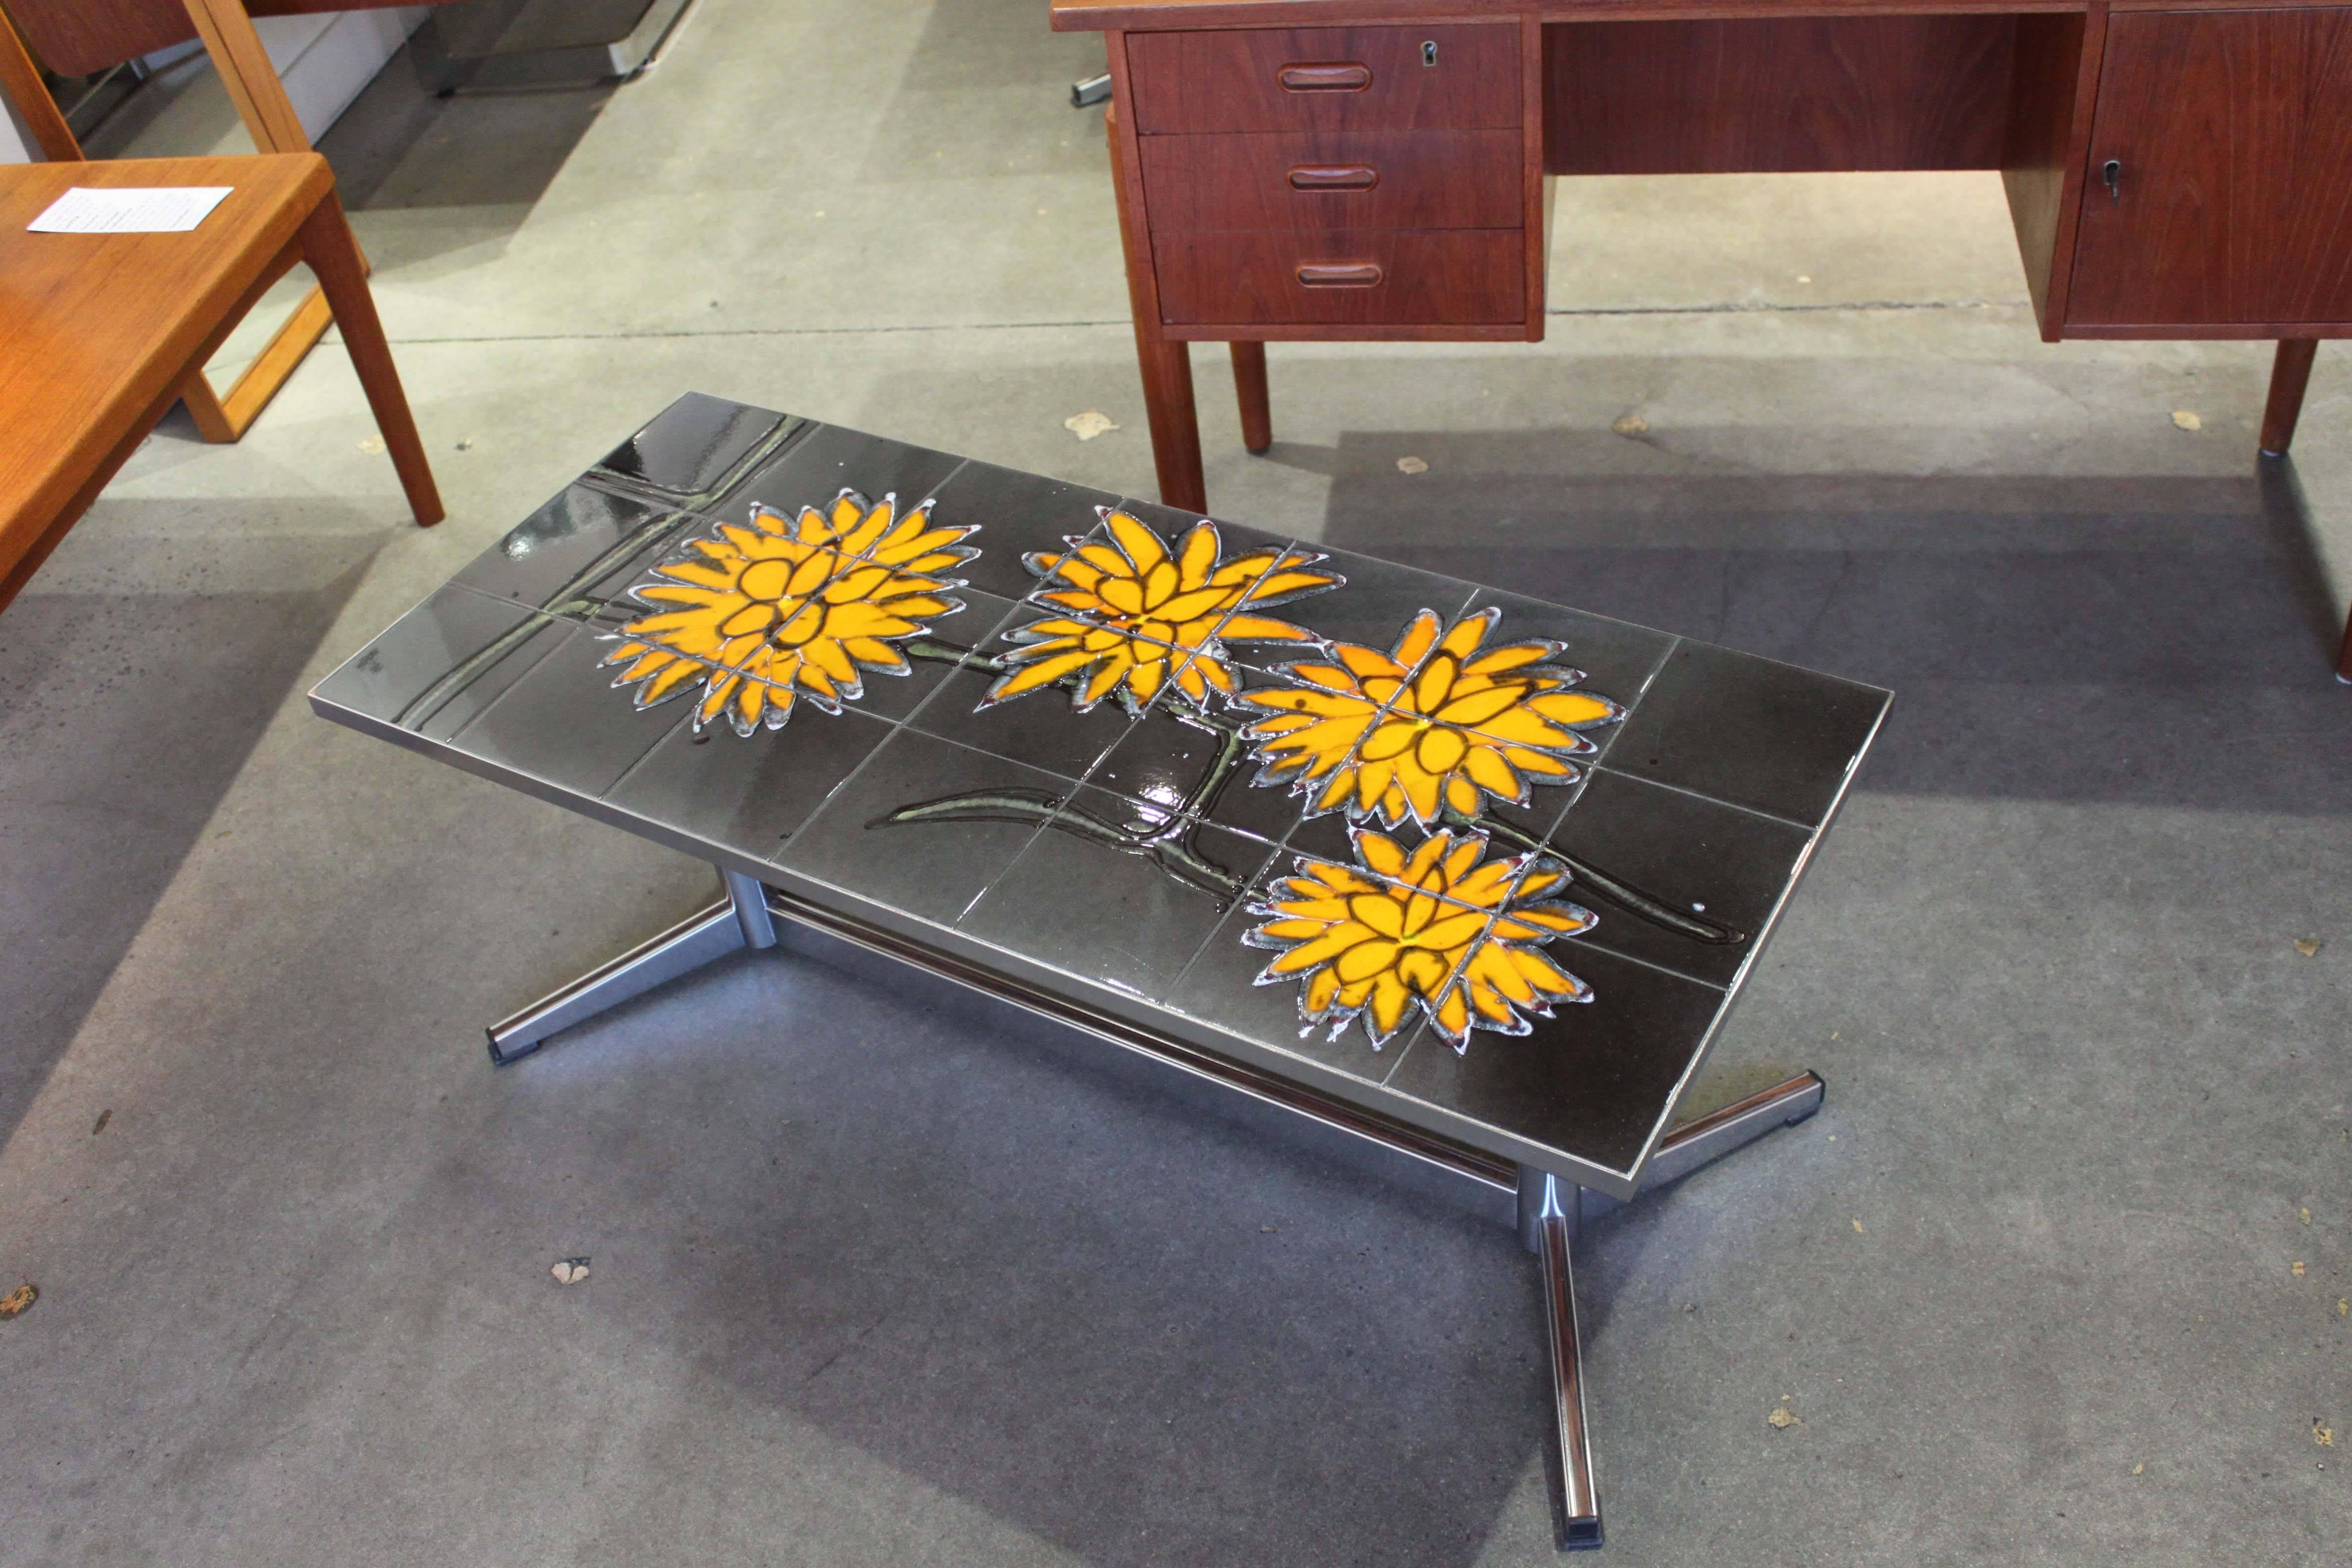 Tiled coffee table with floral motif attributed to Danish maker Adri. Chrome base has woodgrain inserts, in very good original condition.